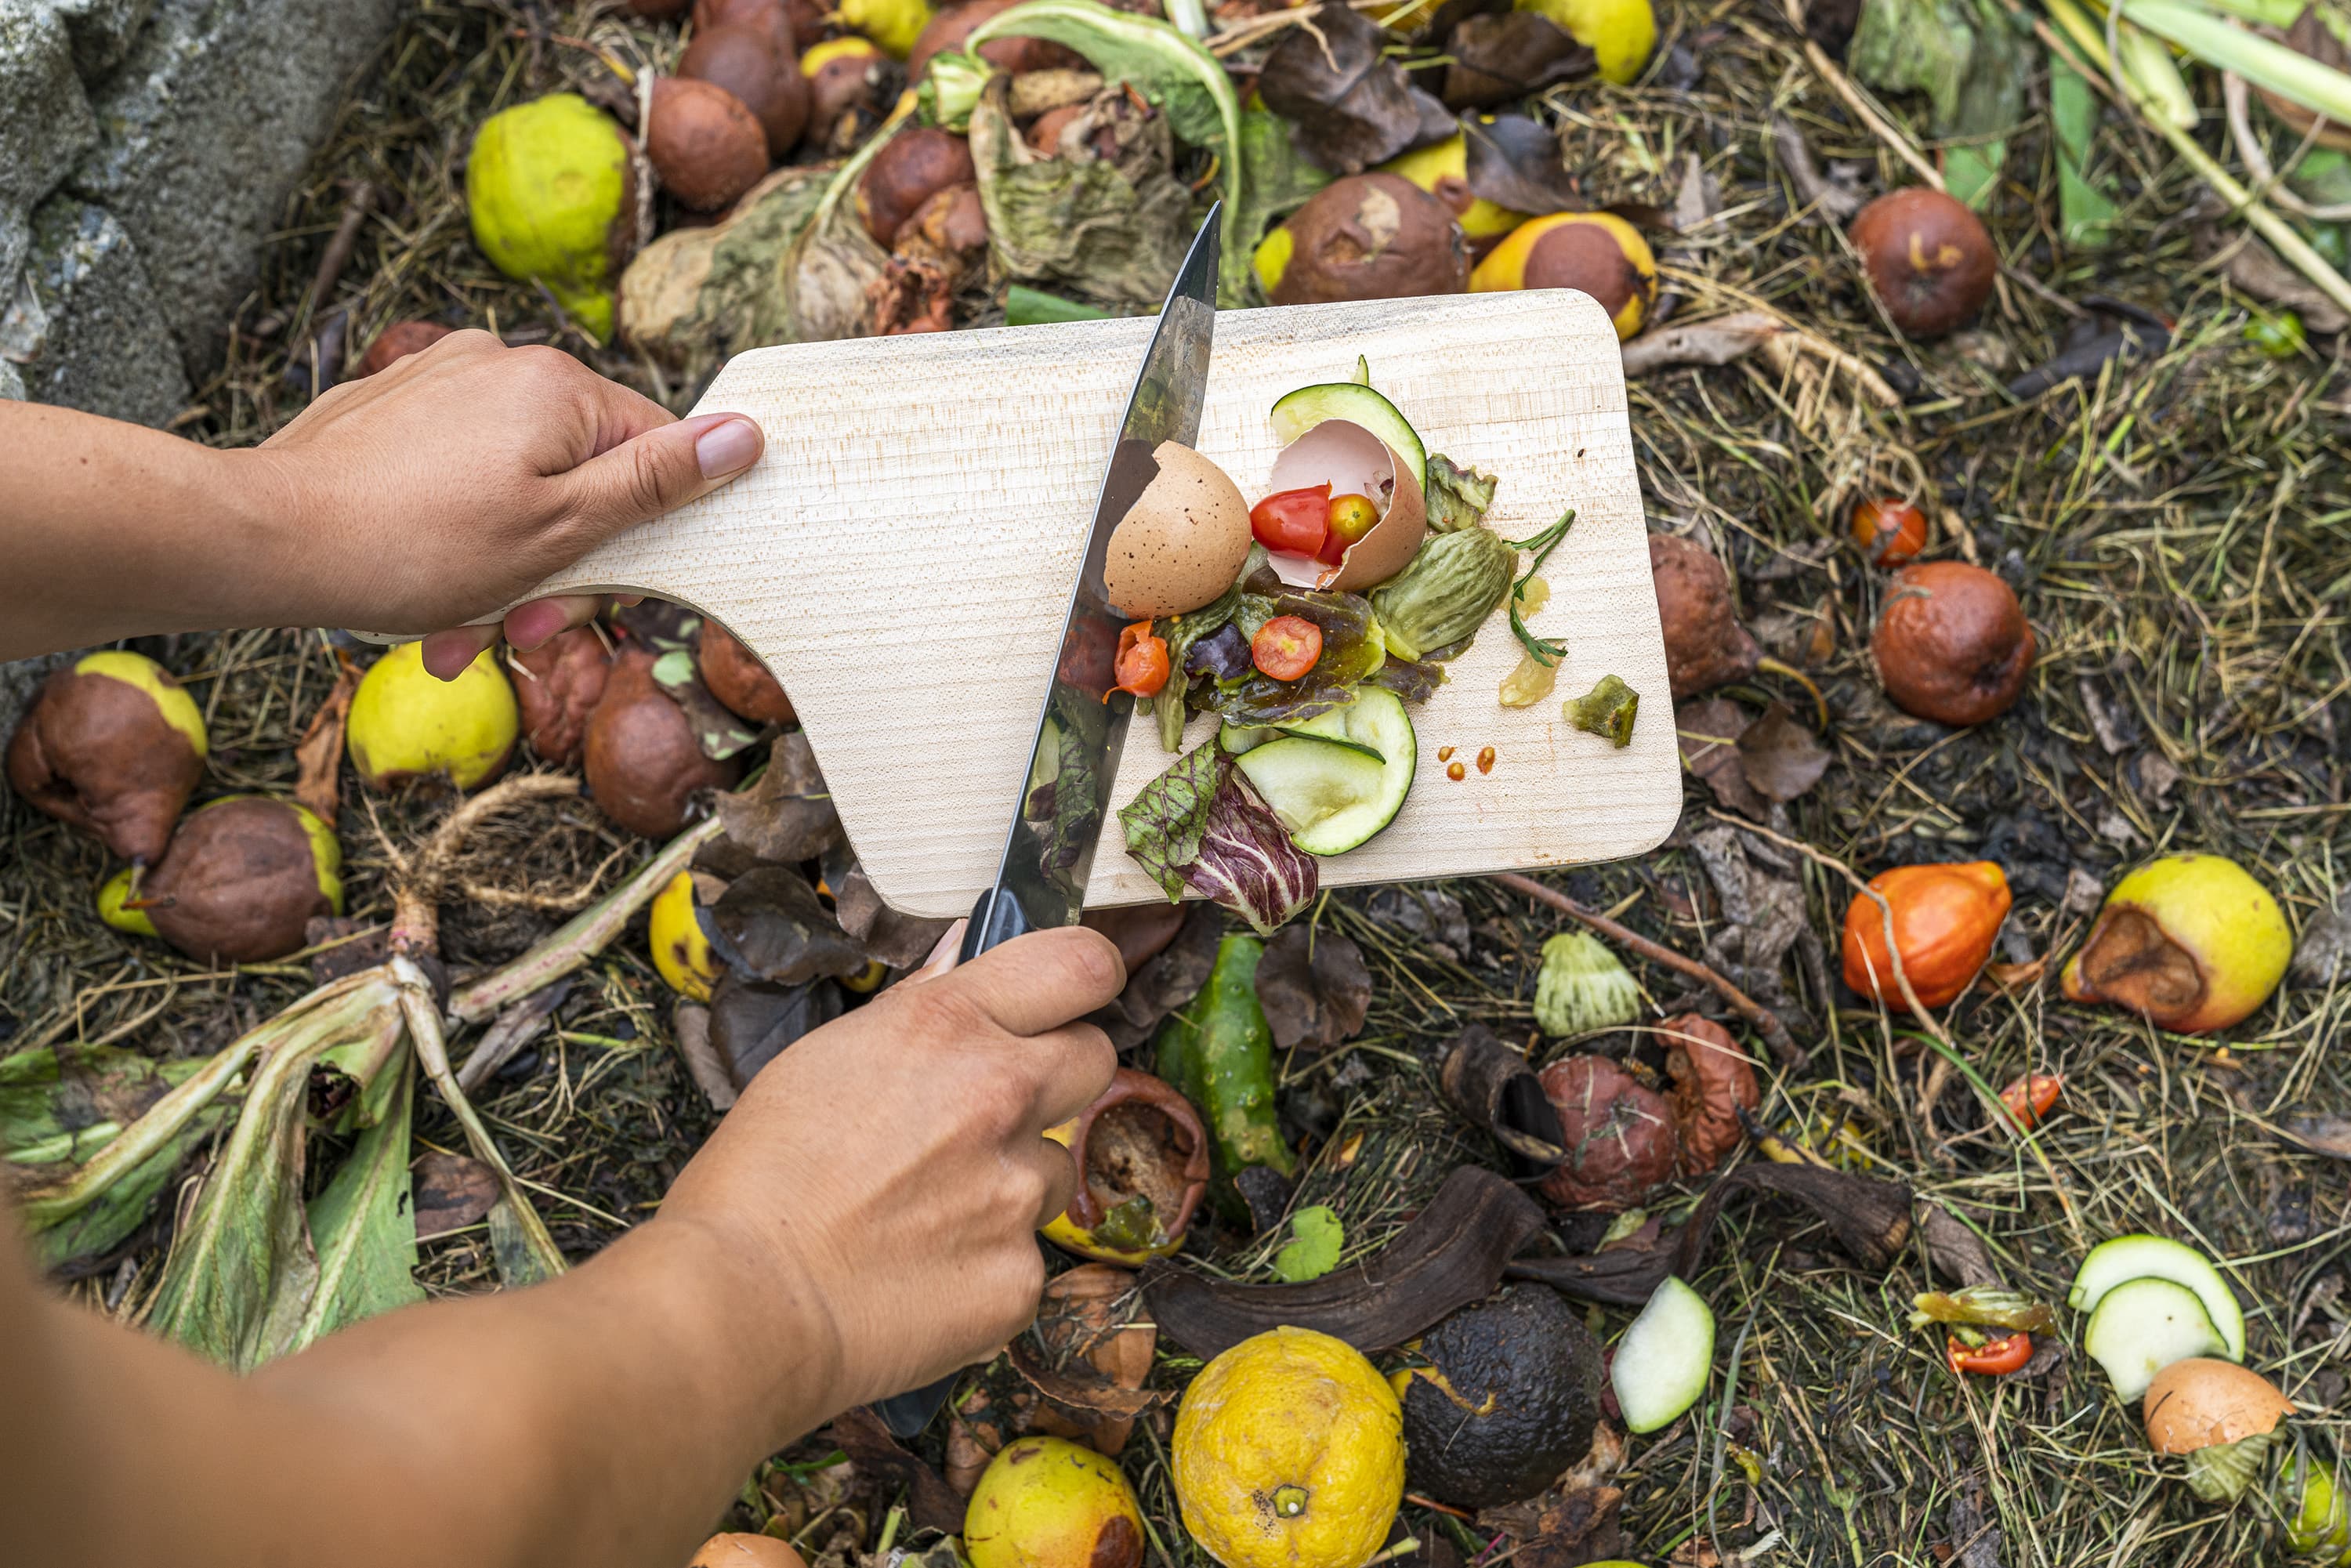 Woman's hands throwing food scraps in the compost heap. (Francesco Vaninetti Photo via Getty Images)